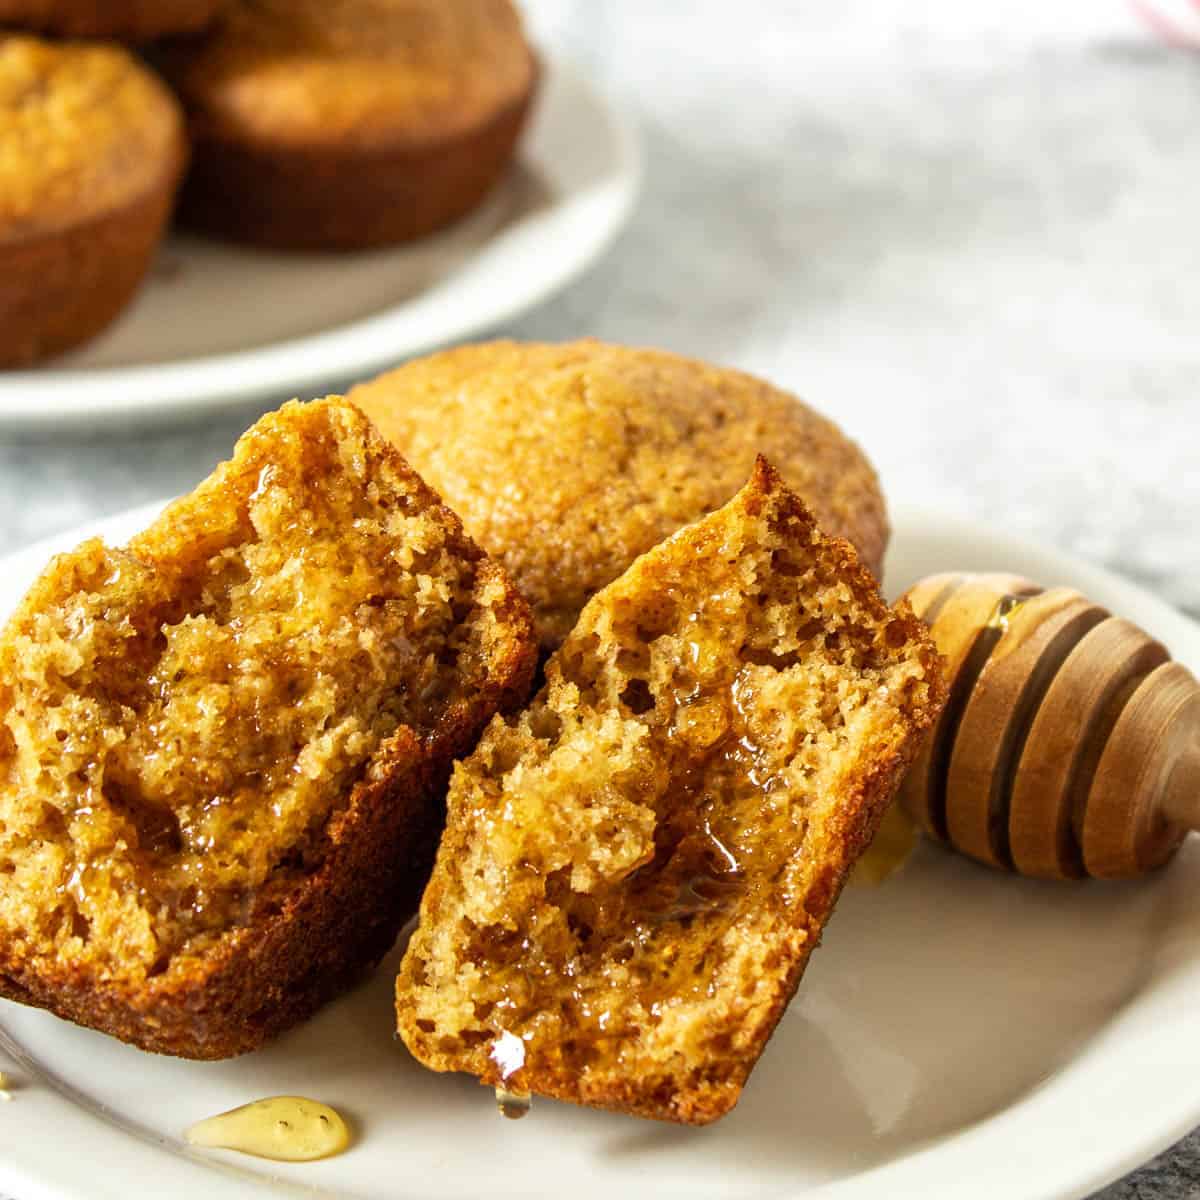 Bran muffin split in half and drizzled with honey on a white plate.